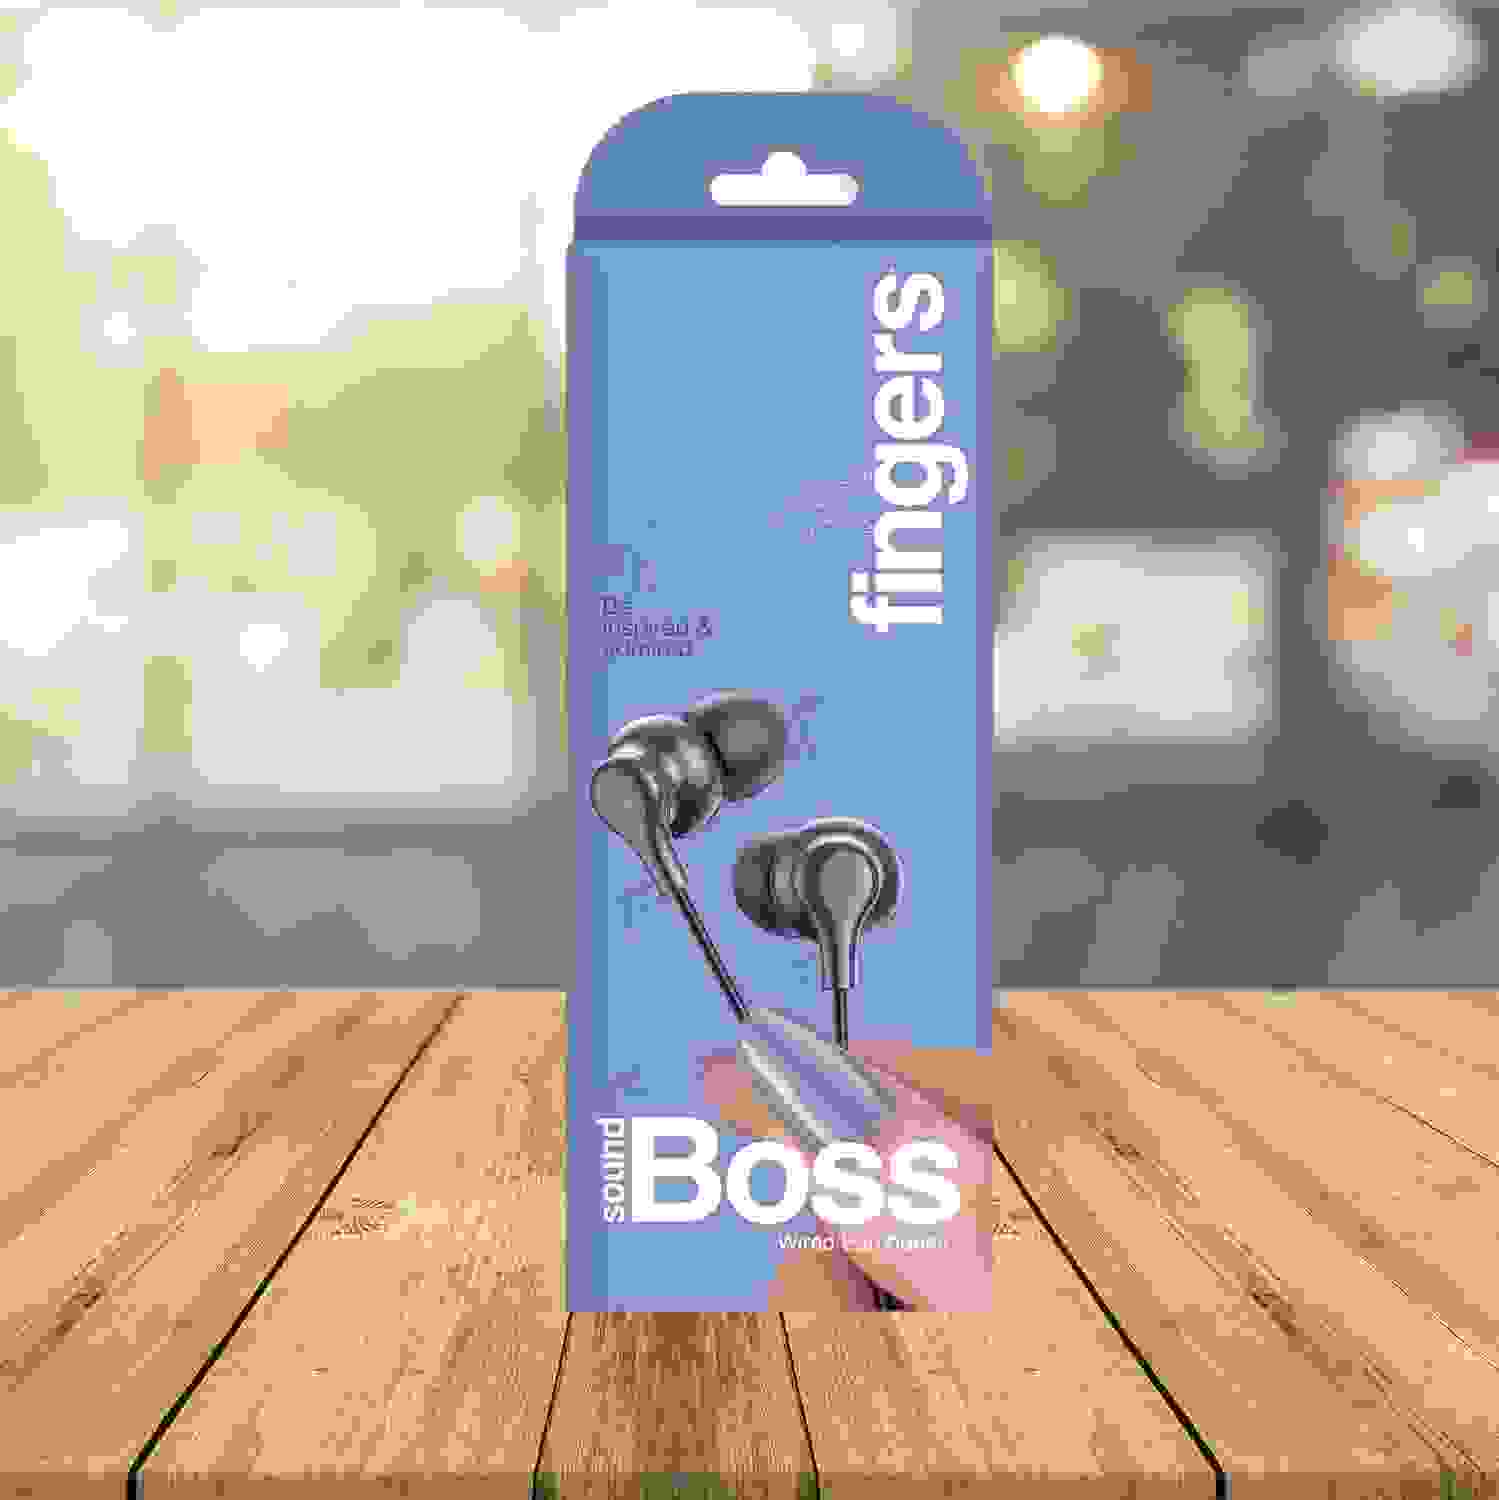 FINGERS SoundBoss Wired Earphones (with in-Built Mic, Sturdy Cable and L-pin Connector)- Dark Silver